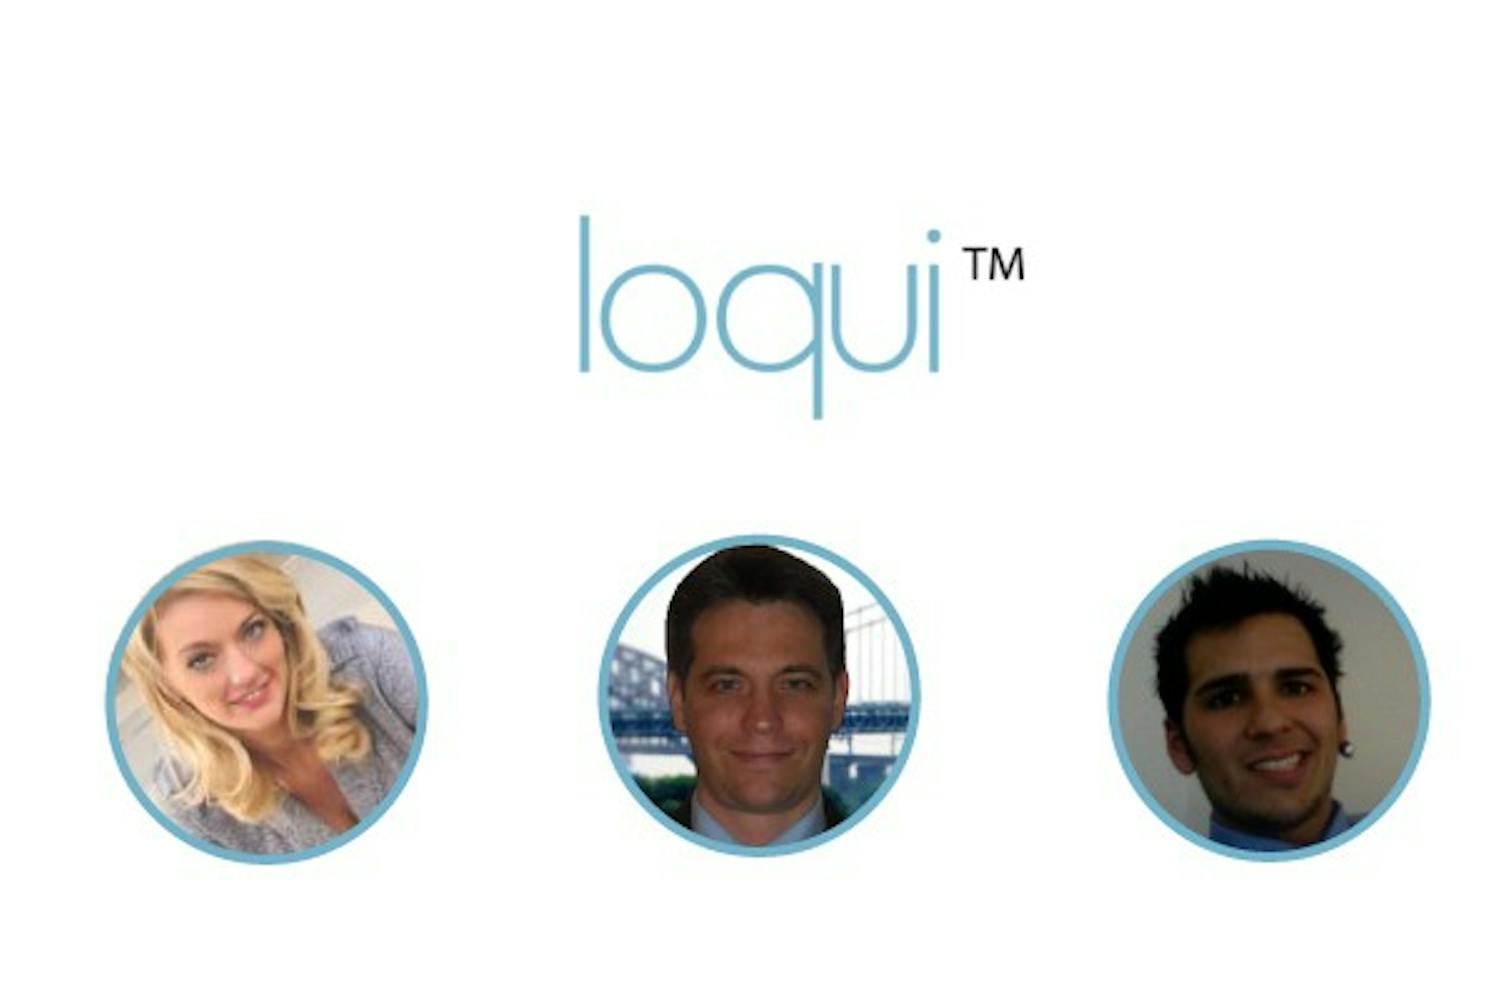 Current ASU students based in DC have developed a universal remote, Loqui. Co-founder of the remote from left to right are Kimberley Heuser, Josh Heuser and Mikel Robinson. 
Photo courtesy of Loqui co-founder